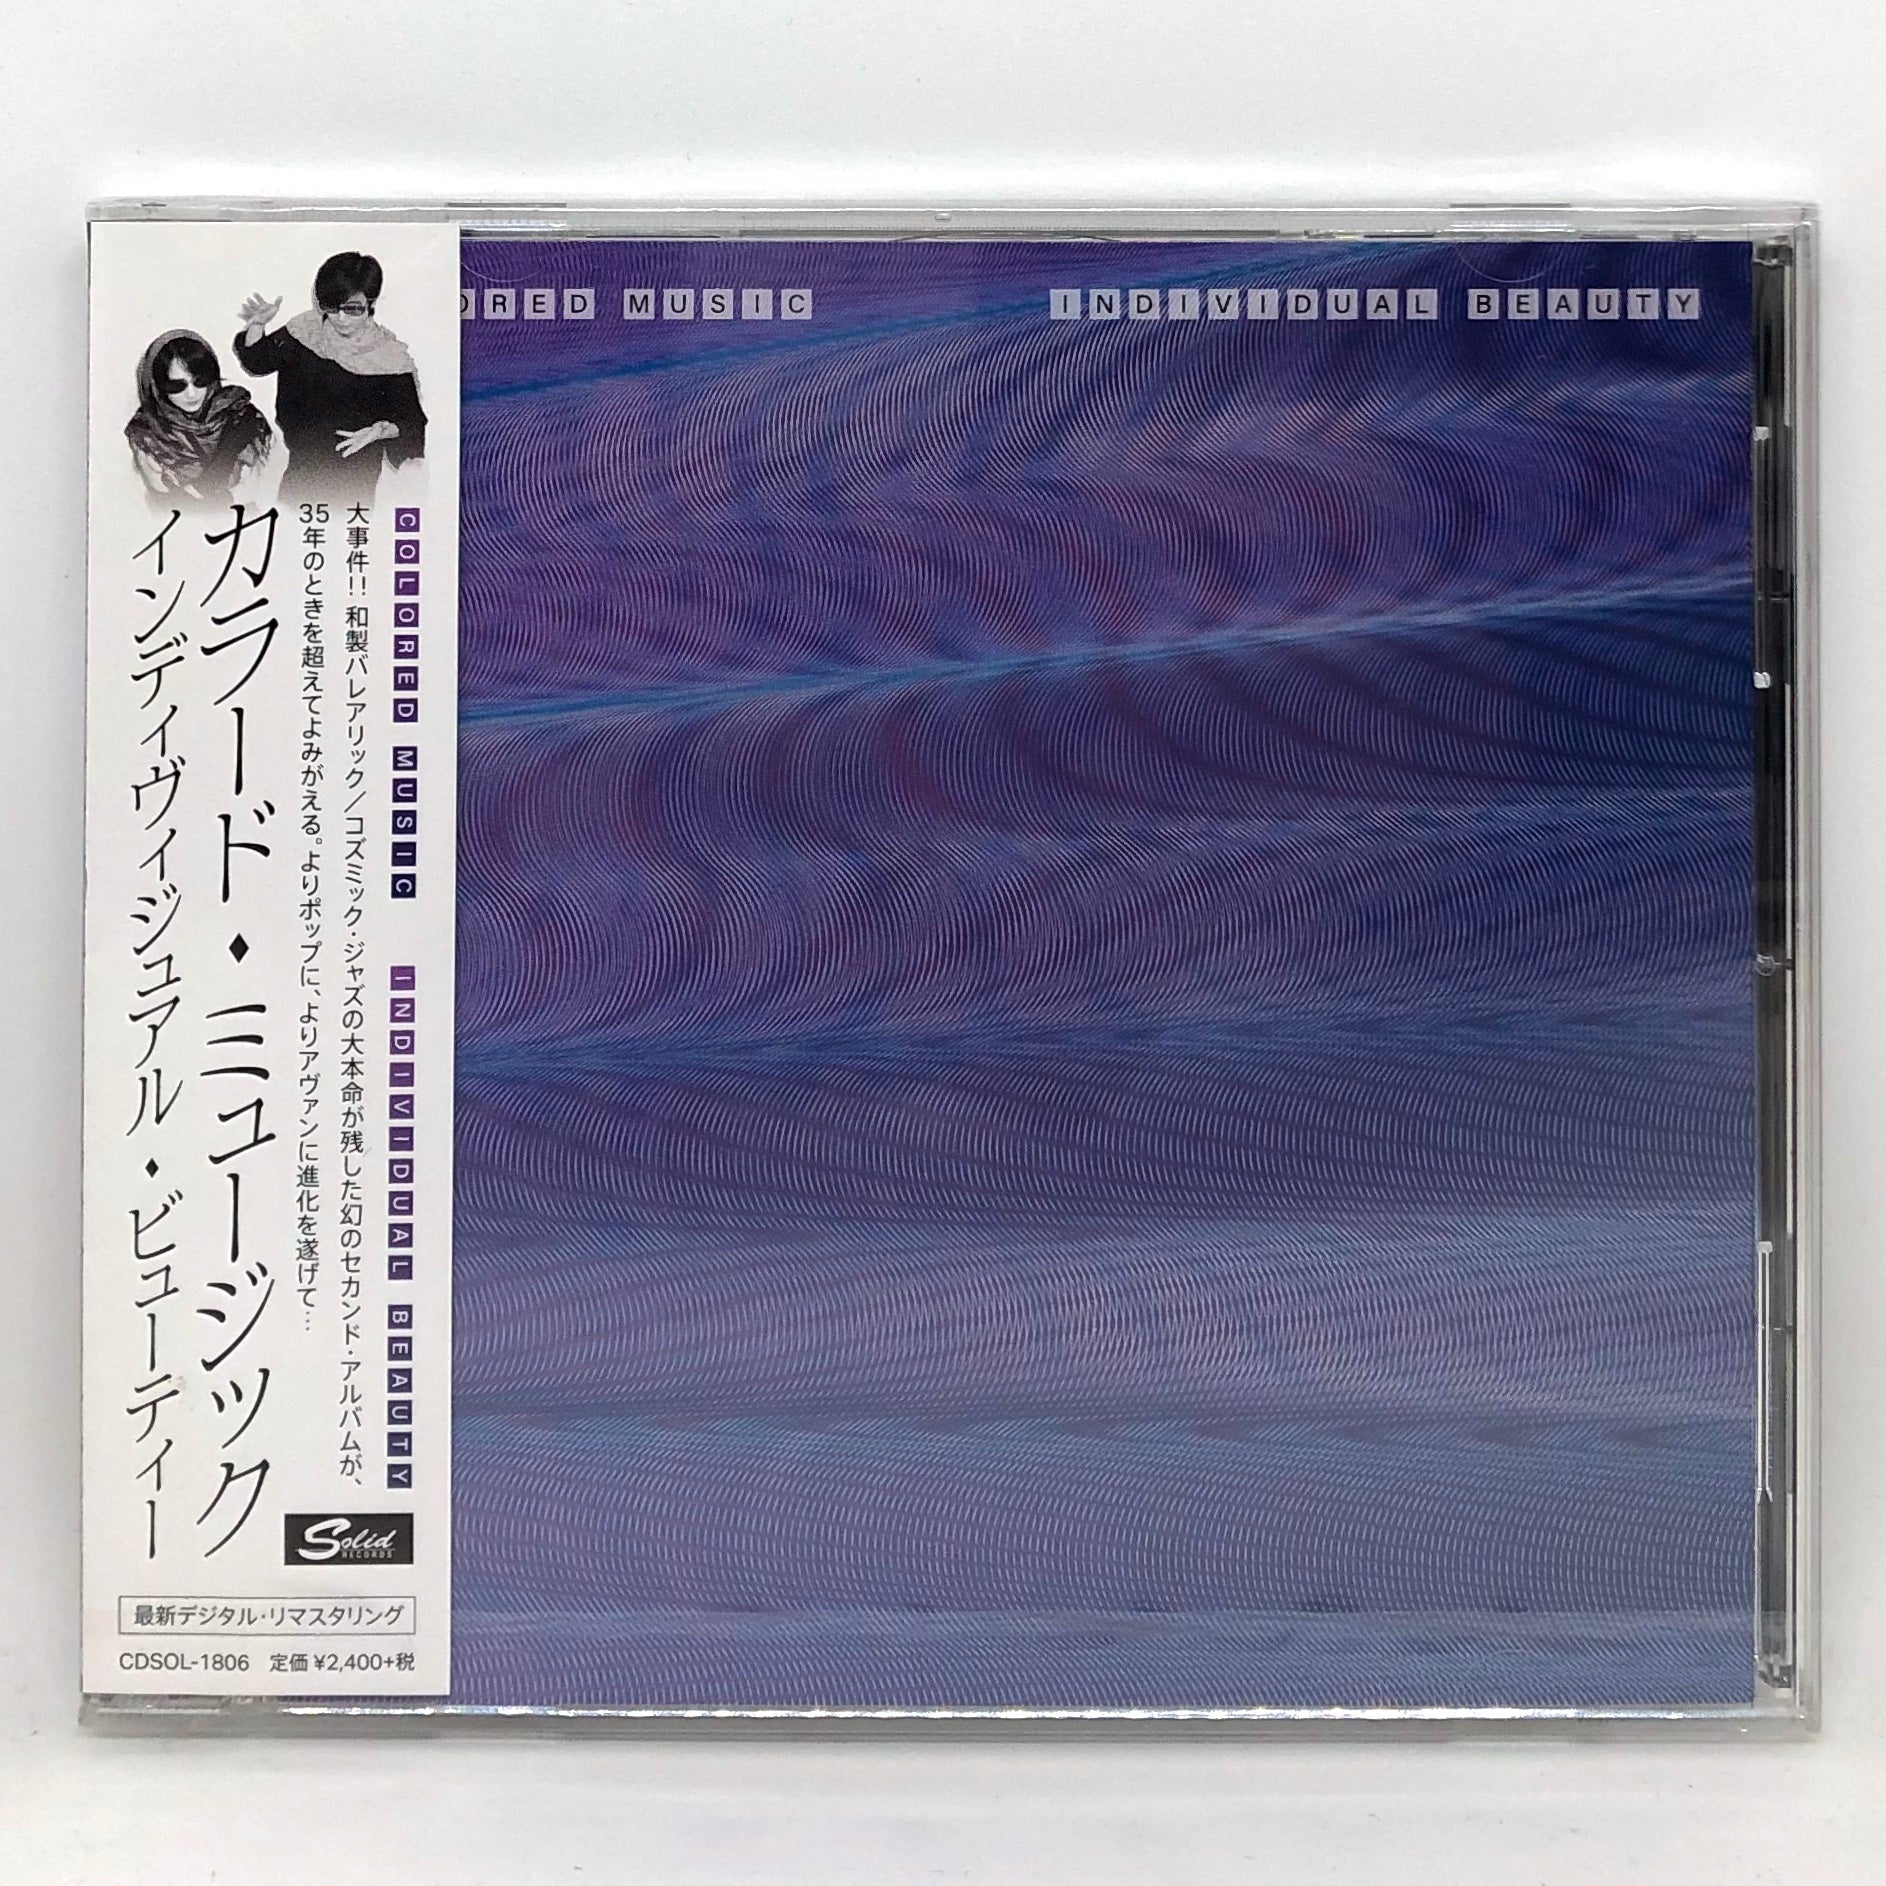 Colored Music “Individual Beauty” CD – PHYSICAL STORE